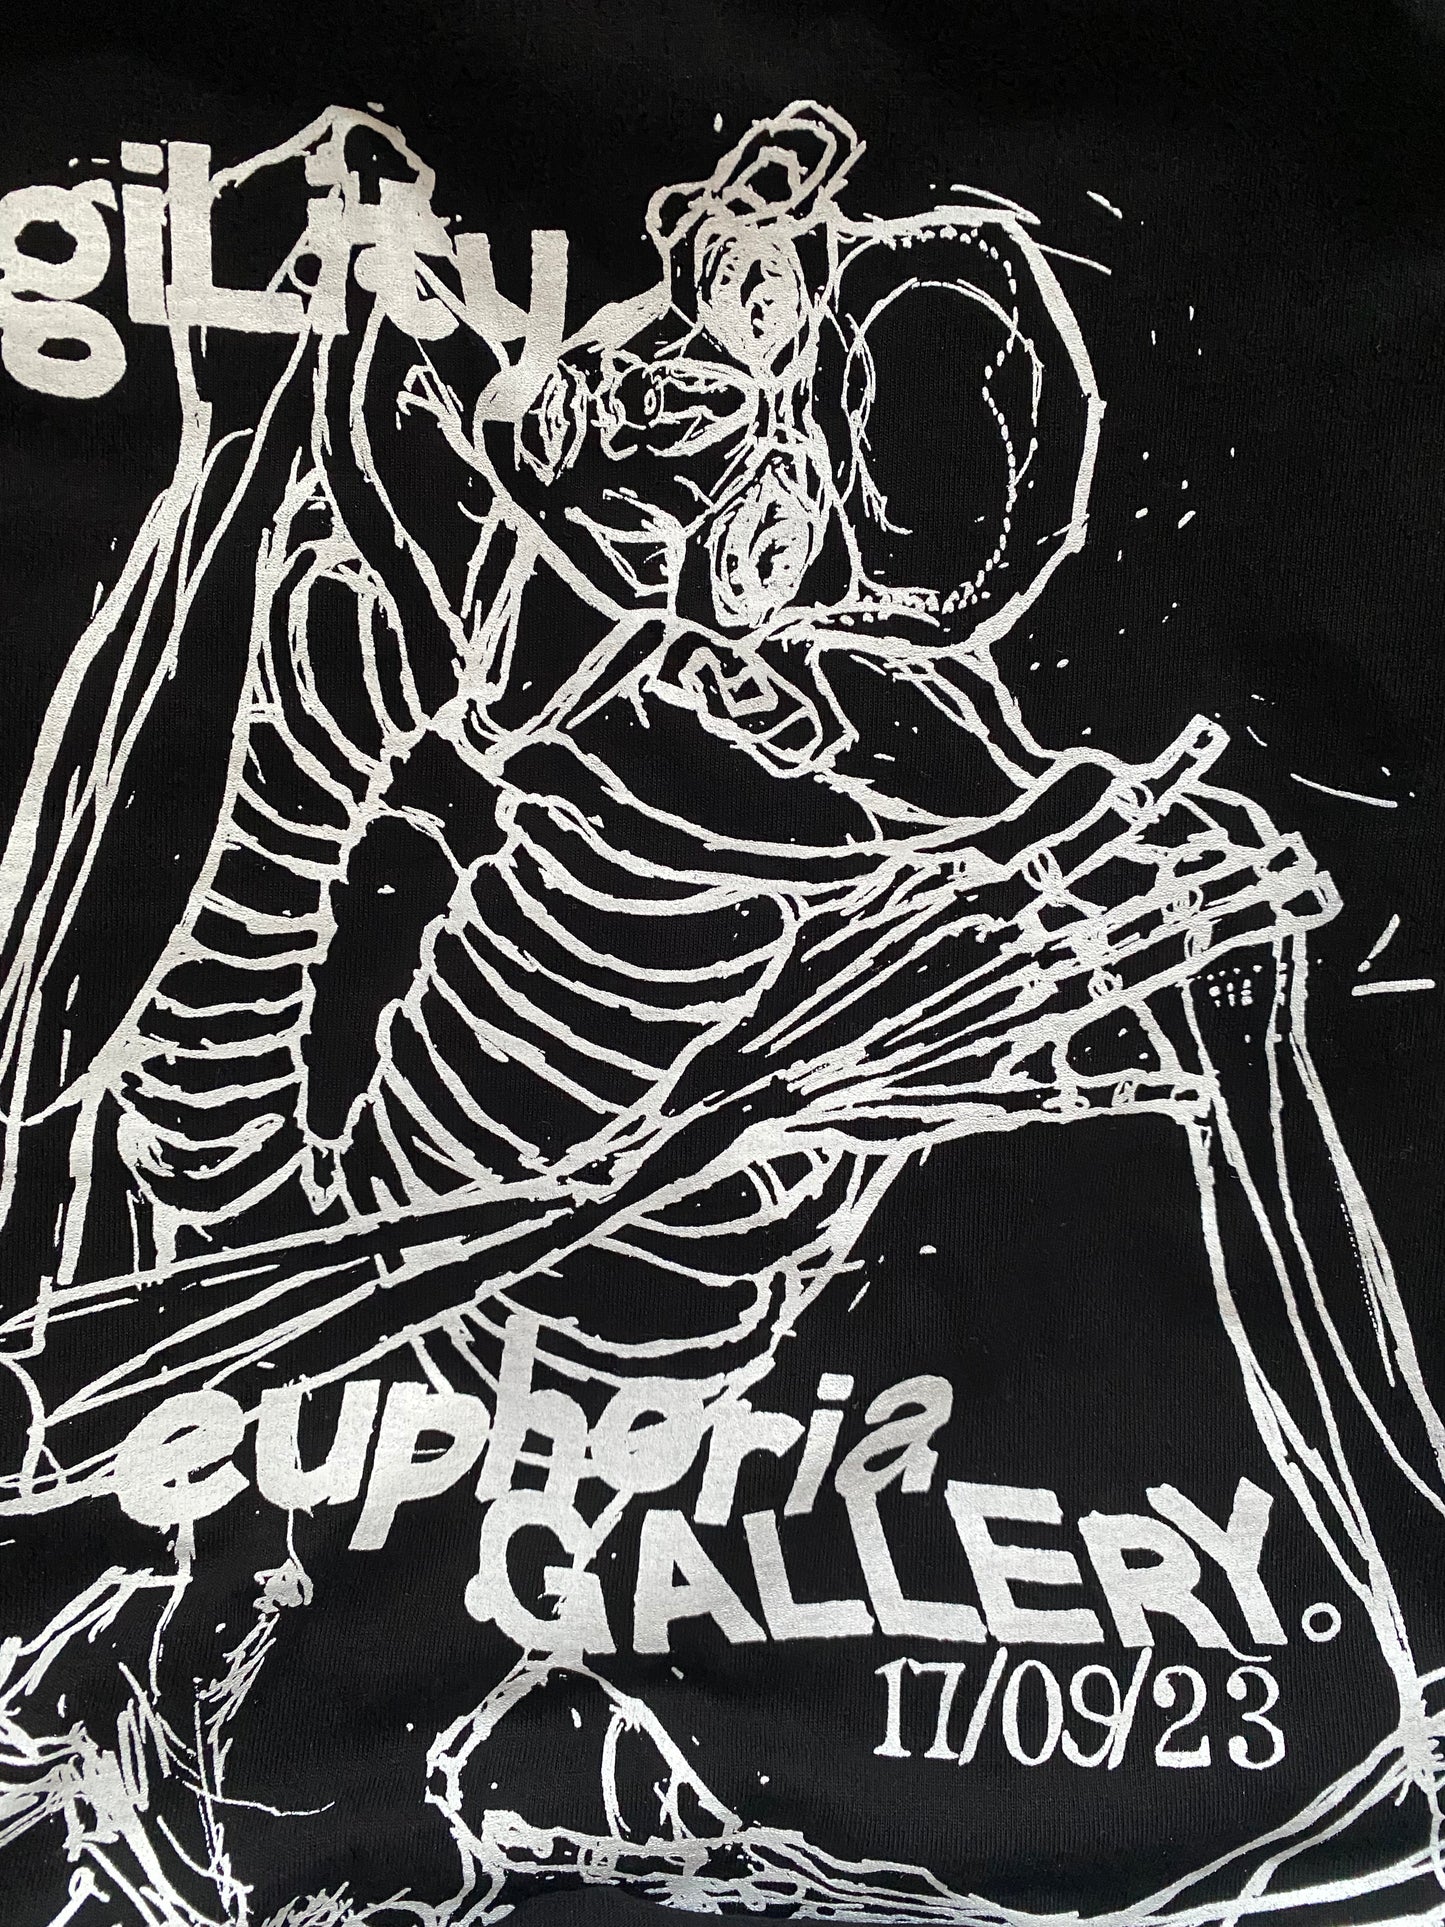 Fragility X Euphoria Gallery t-shIRT (Limited edition)